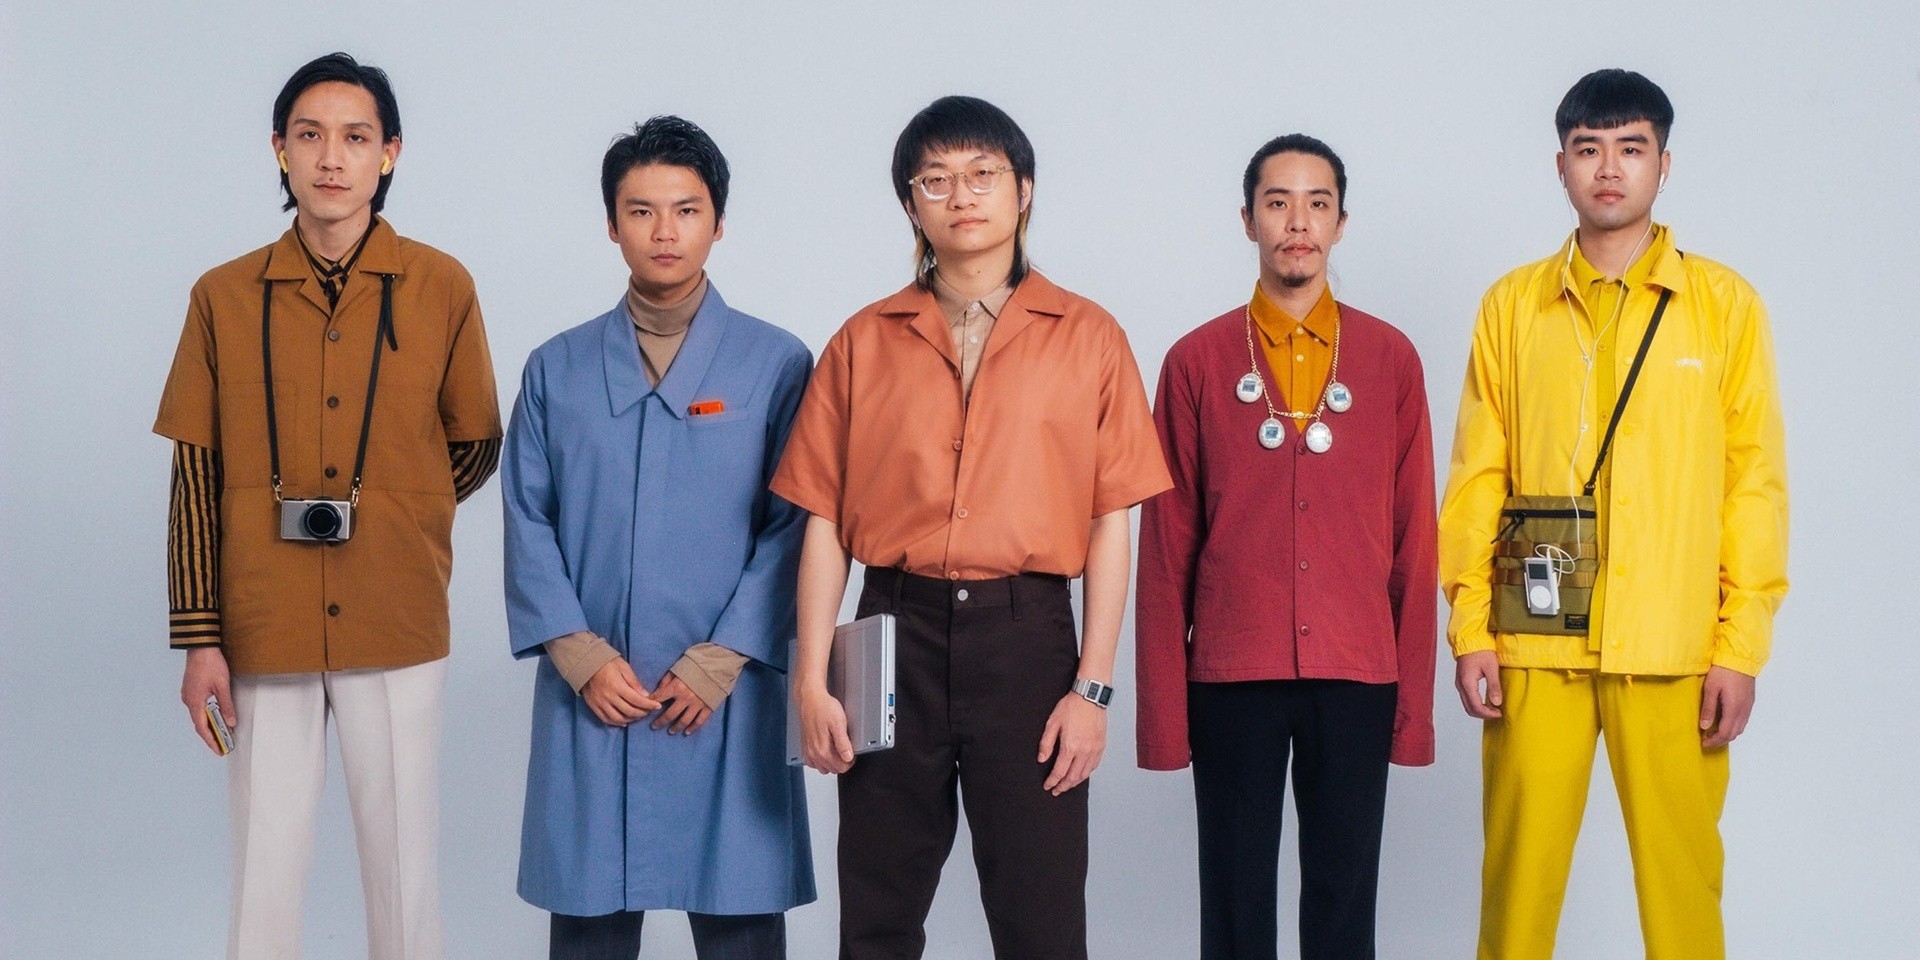 Sunset Rollercoaster release new album SOFT STORM, featuring HYUKOH's Oh Hyuk and Michael Seyer – listen